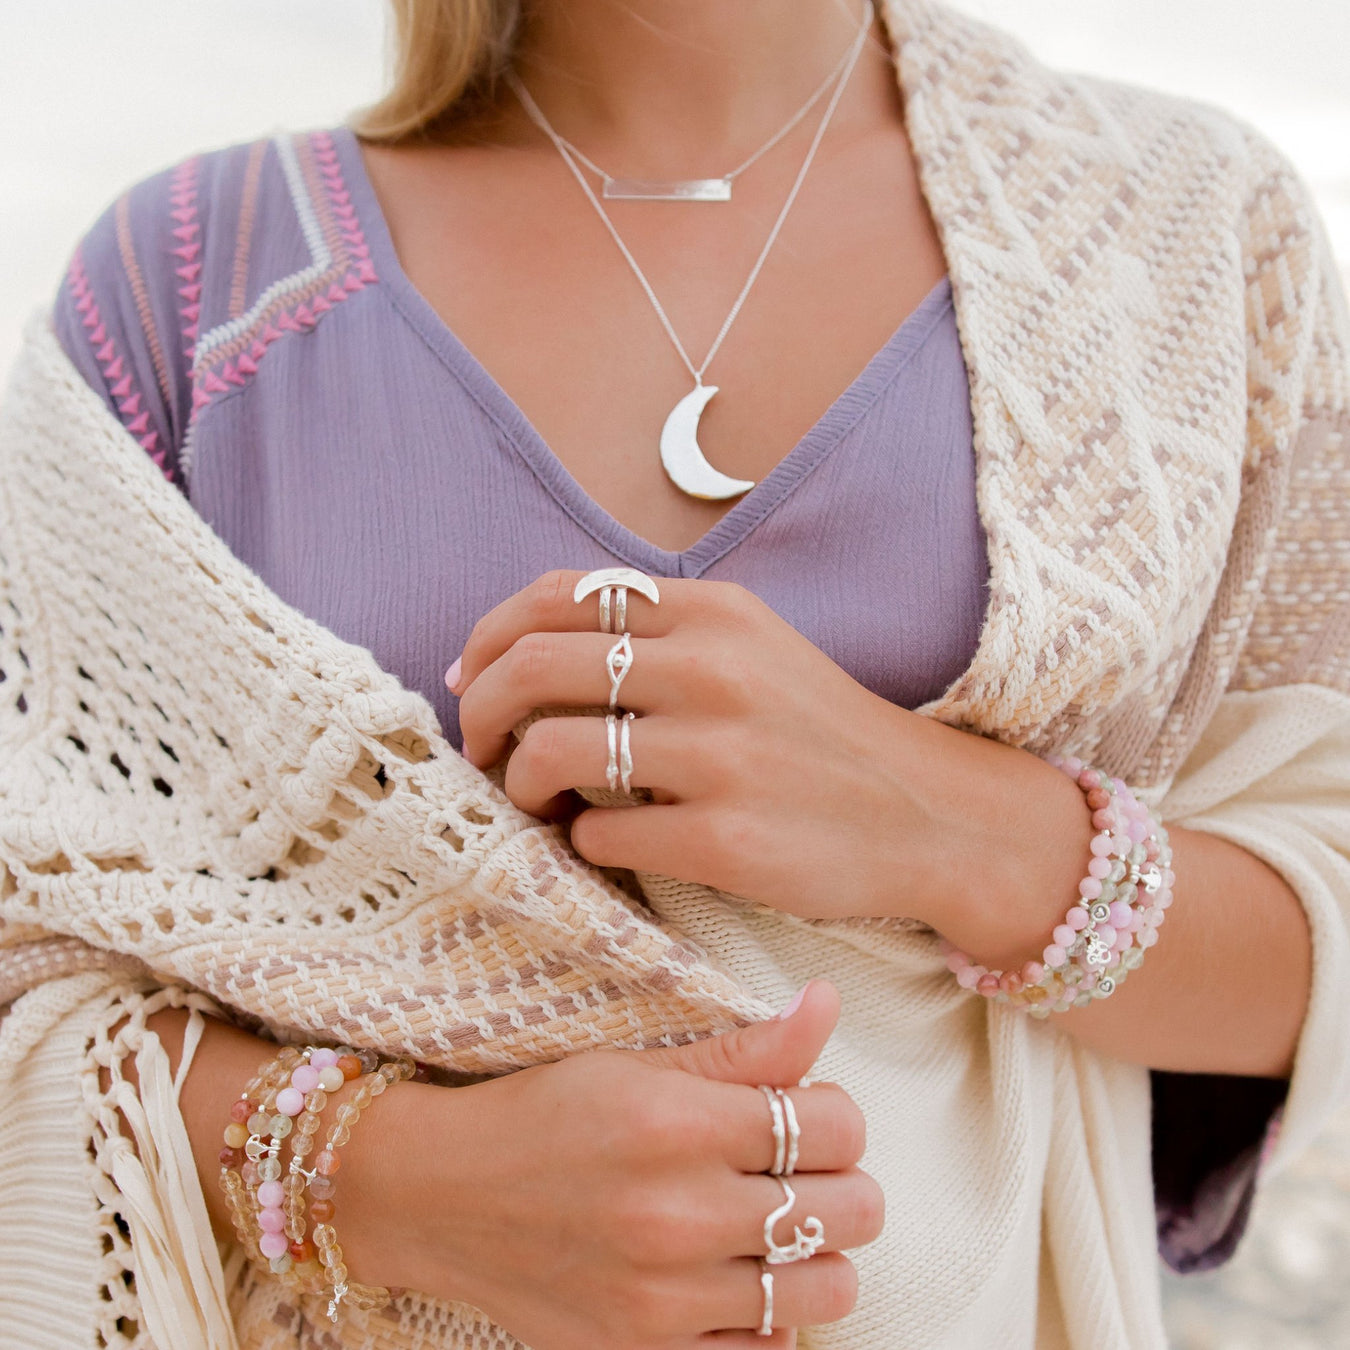 Luna Crescent Moon Necklace Ring - Moon Jewelry - layered necklaces on model - Blooming Lotus Jewelry